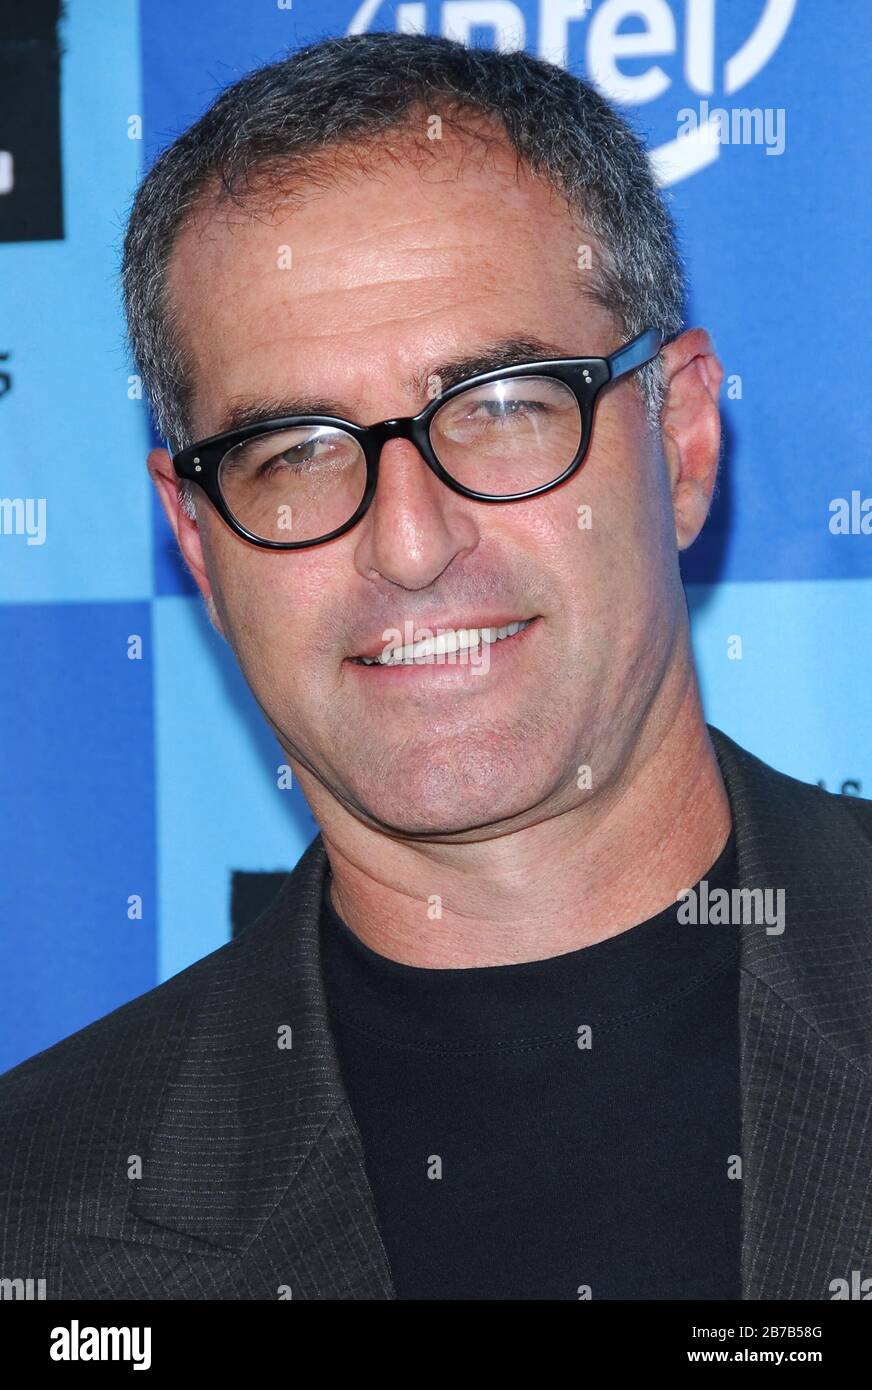 Director David Frankel at the 2006 Los Angeles Film Festival Opening Night - 'The Devil Wears Prada' Premiere held at the Mann Village Theater in Westwood, CA. The event took place on Thursday, June 22, 2006. Photo by: SBM / PictureLux Stock Photo